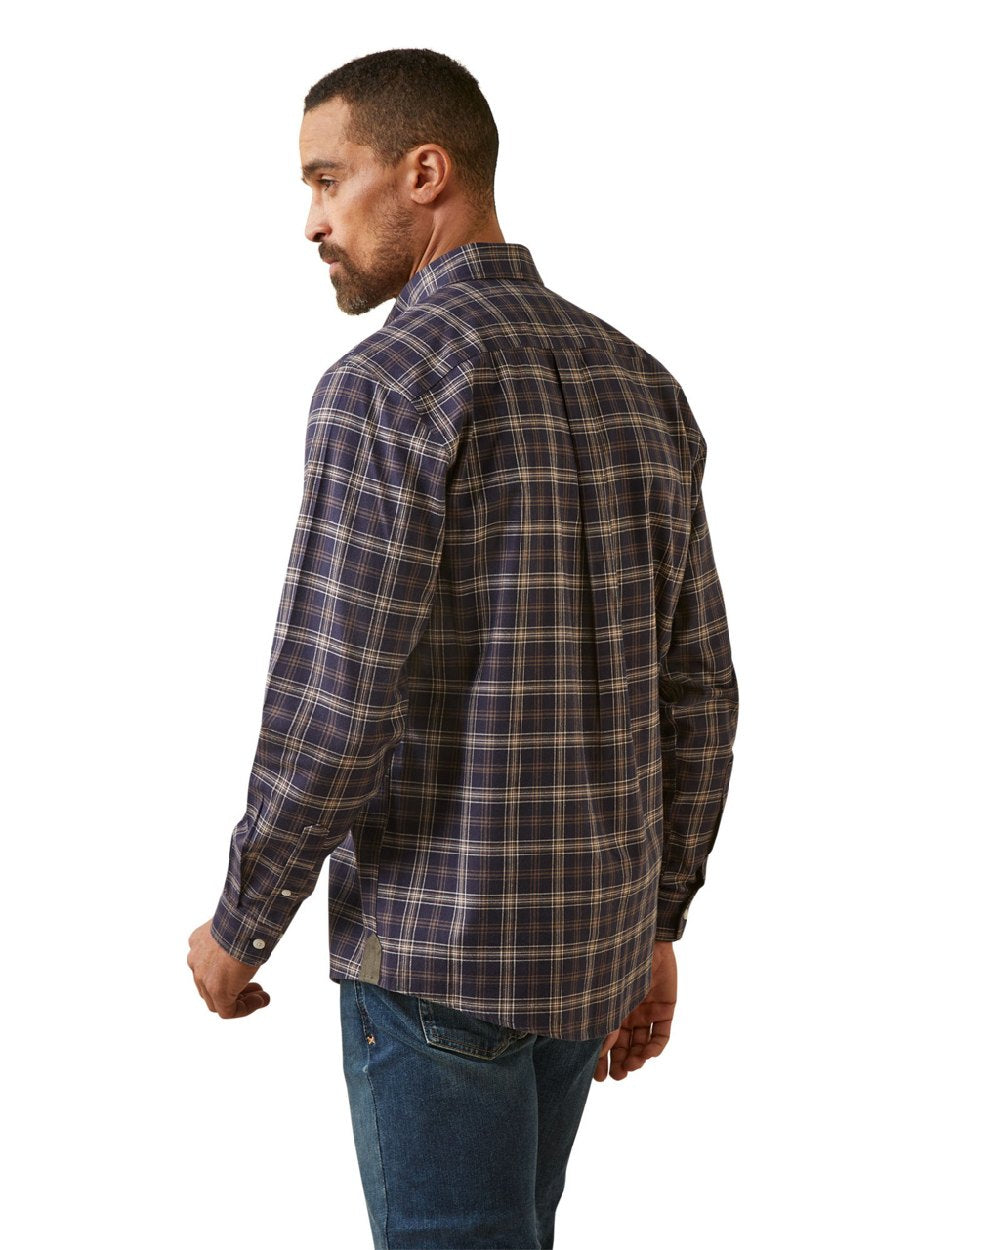 Ariat Mens Clement Long Sleeve Shirt in Navy Plaid 